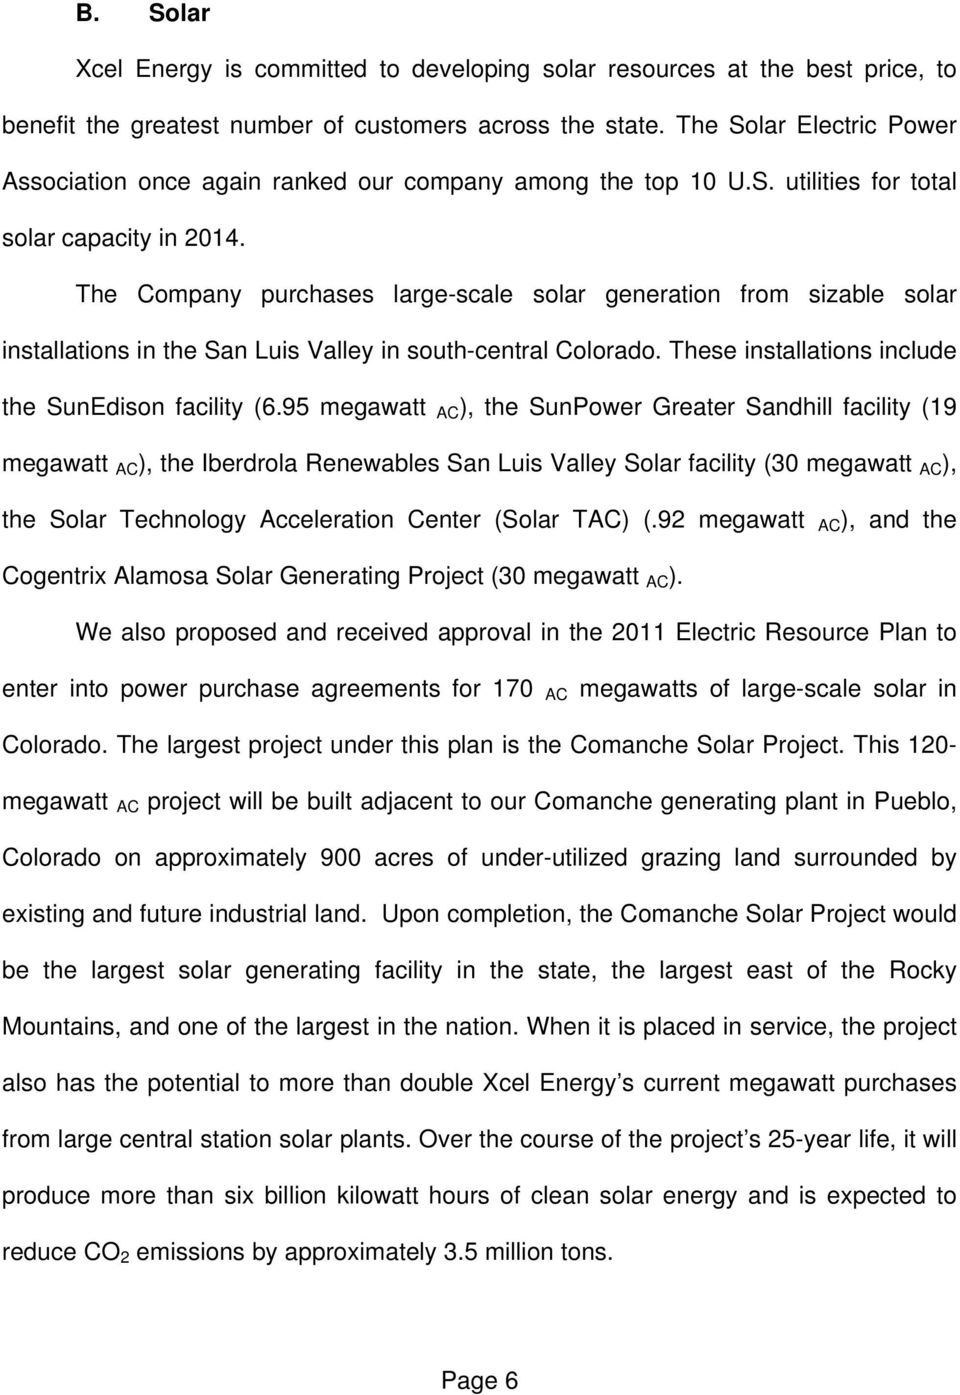 The Company purchases large-scale solar generation from sizable solar installations in the San Luis Valley in south-central Colorado. These installations include the SunEdison facility (6.